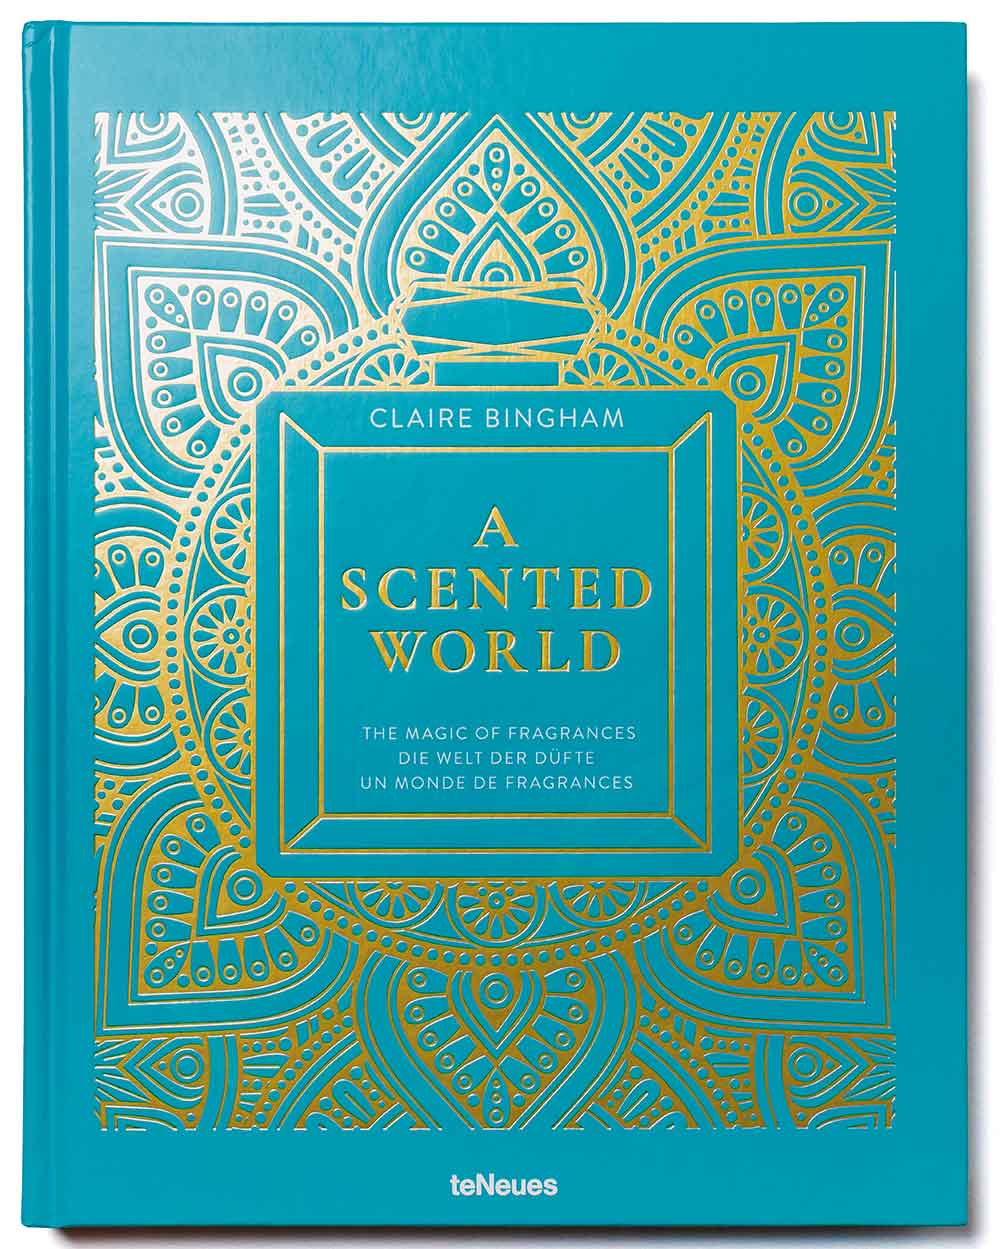 A Scented World, the Magic of Fragrances – Claire Bingham